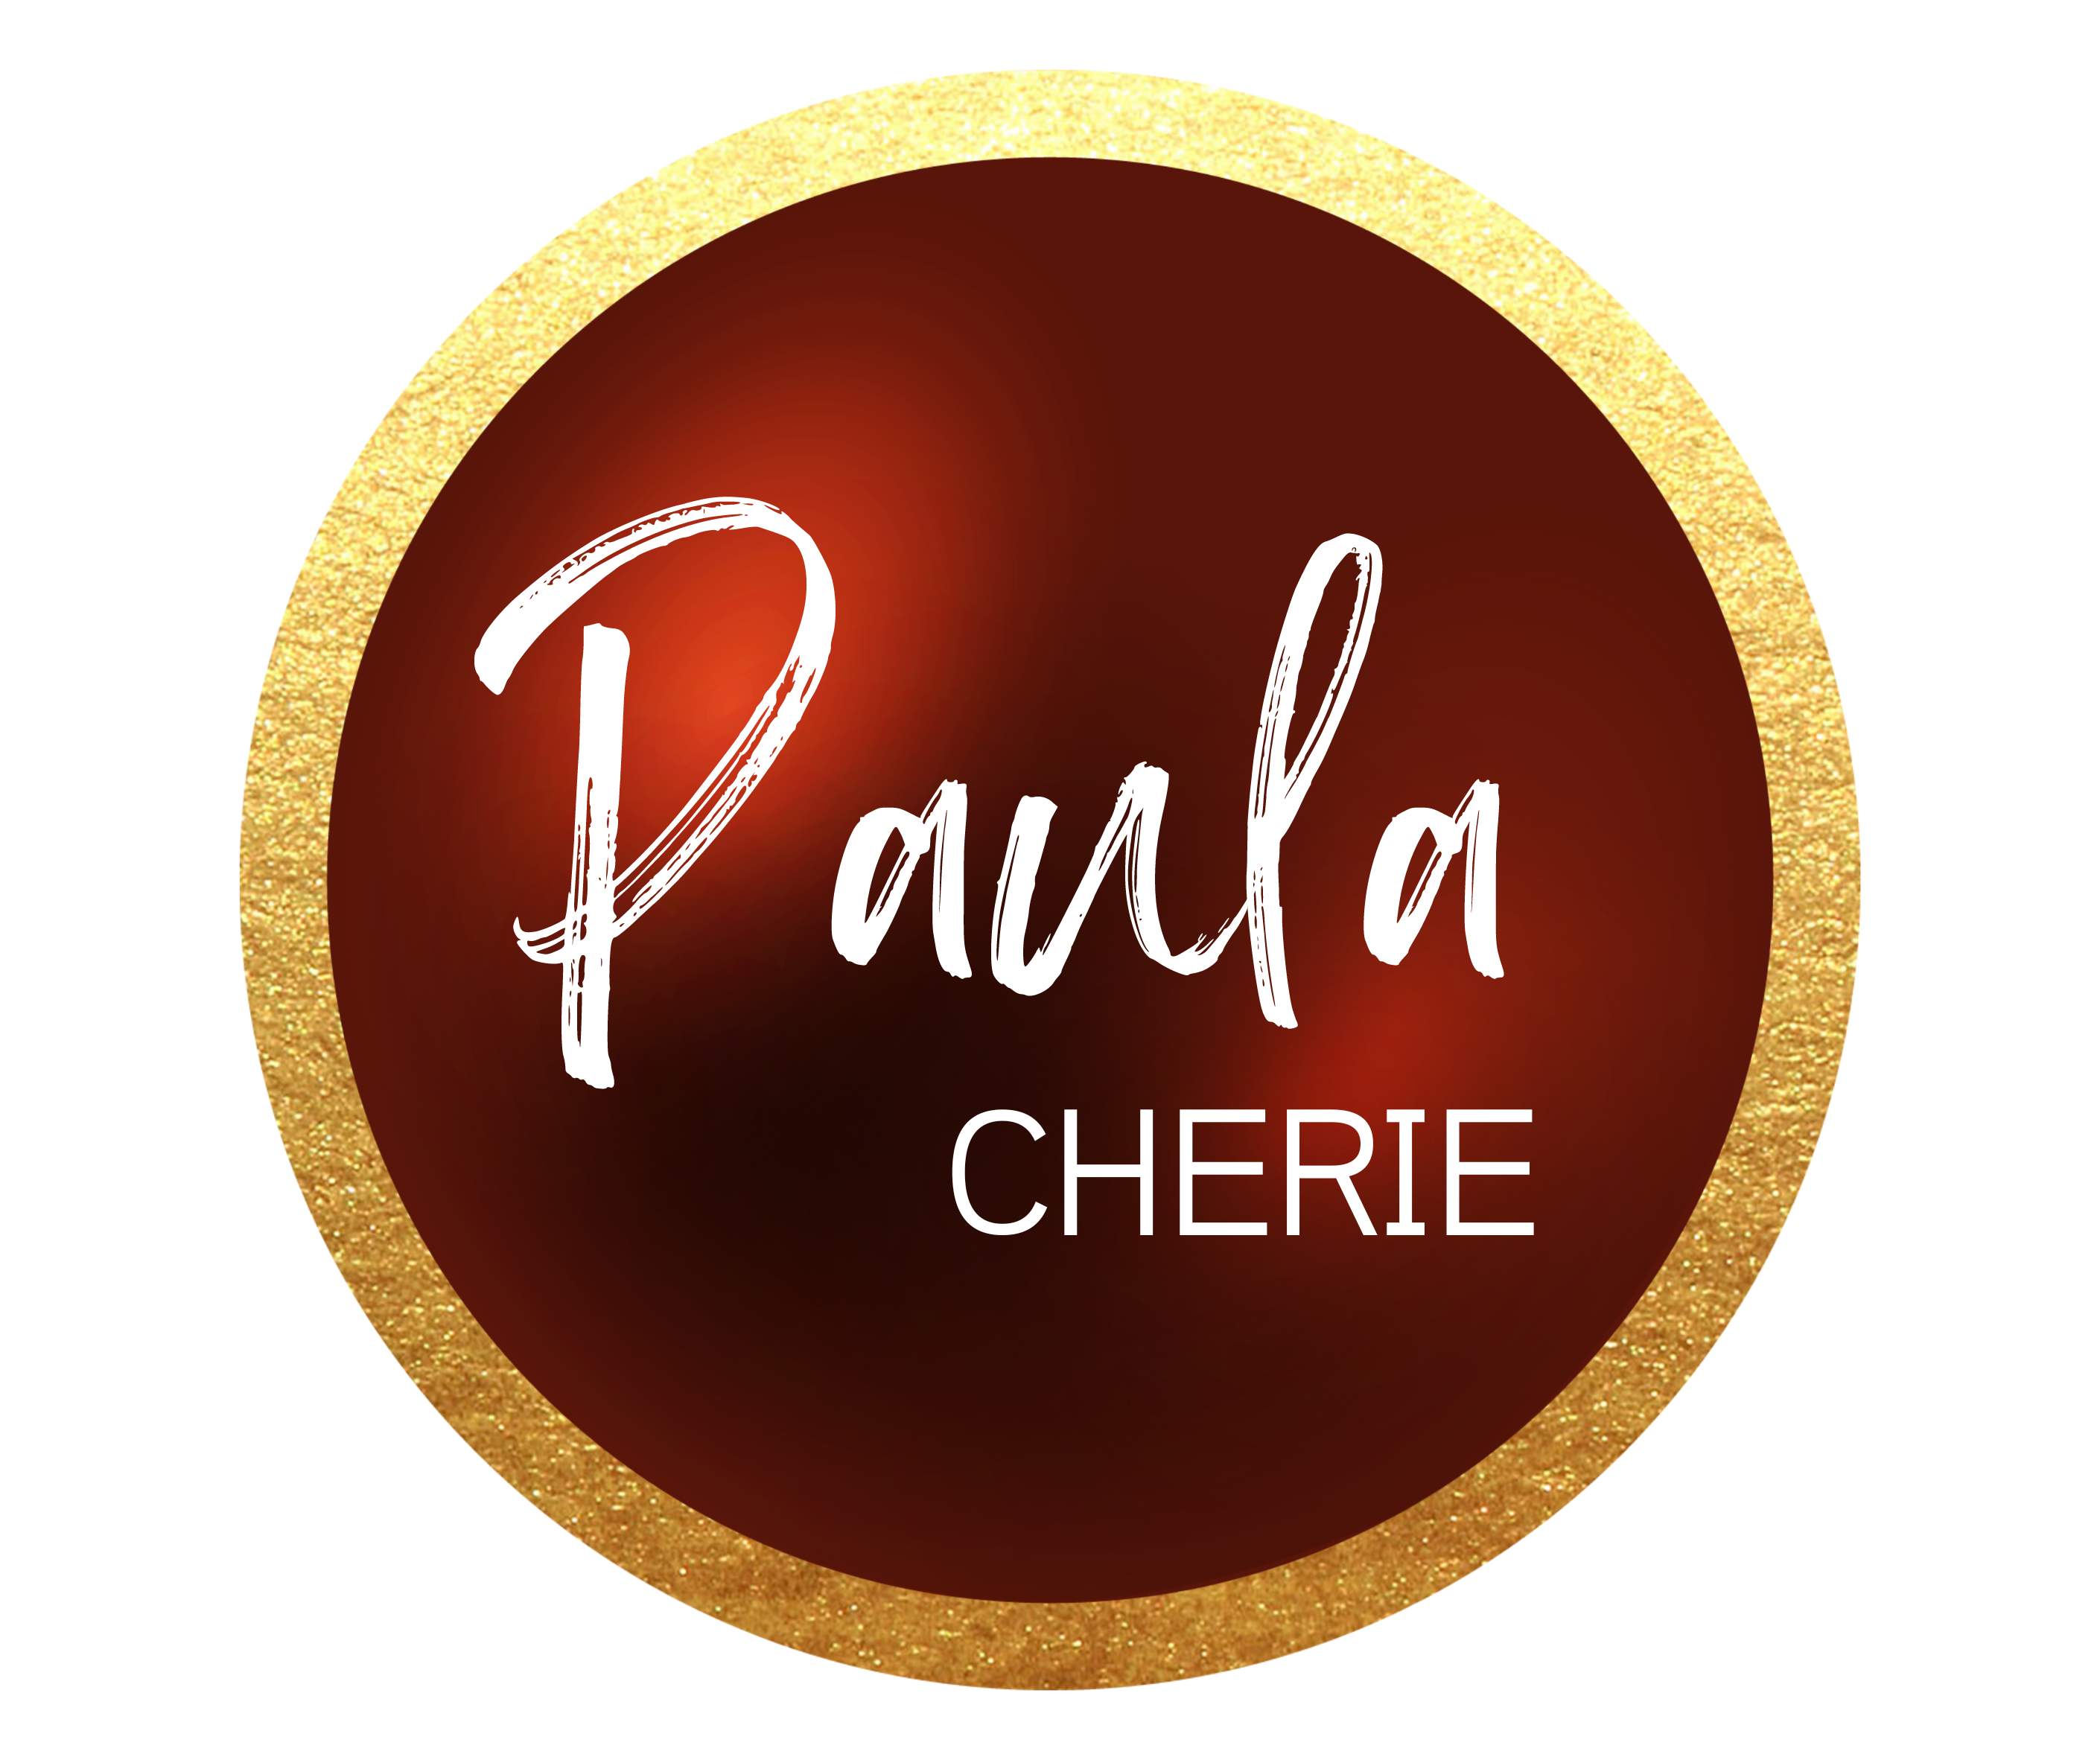 Paula Cherie Helps Women Achieve Lasting Change and Growth as CEO and Coach at Virtual Women's Expo and Power Breakthrough